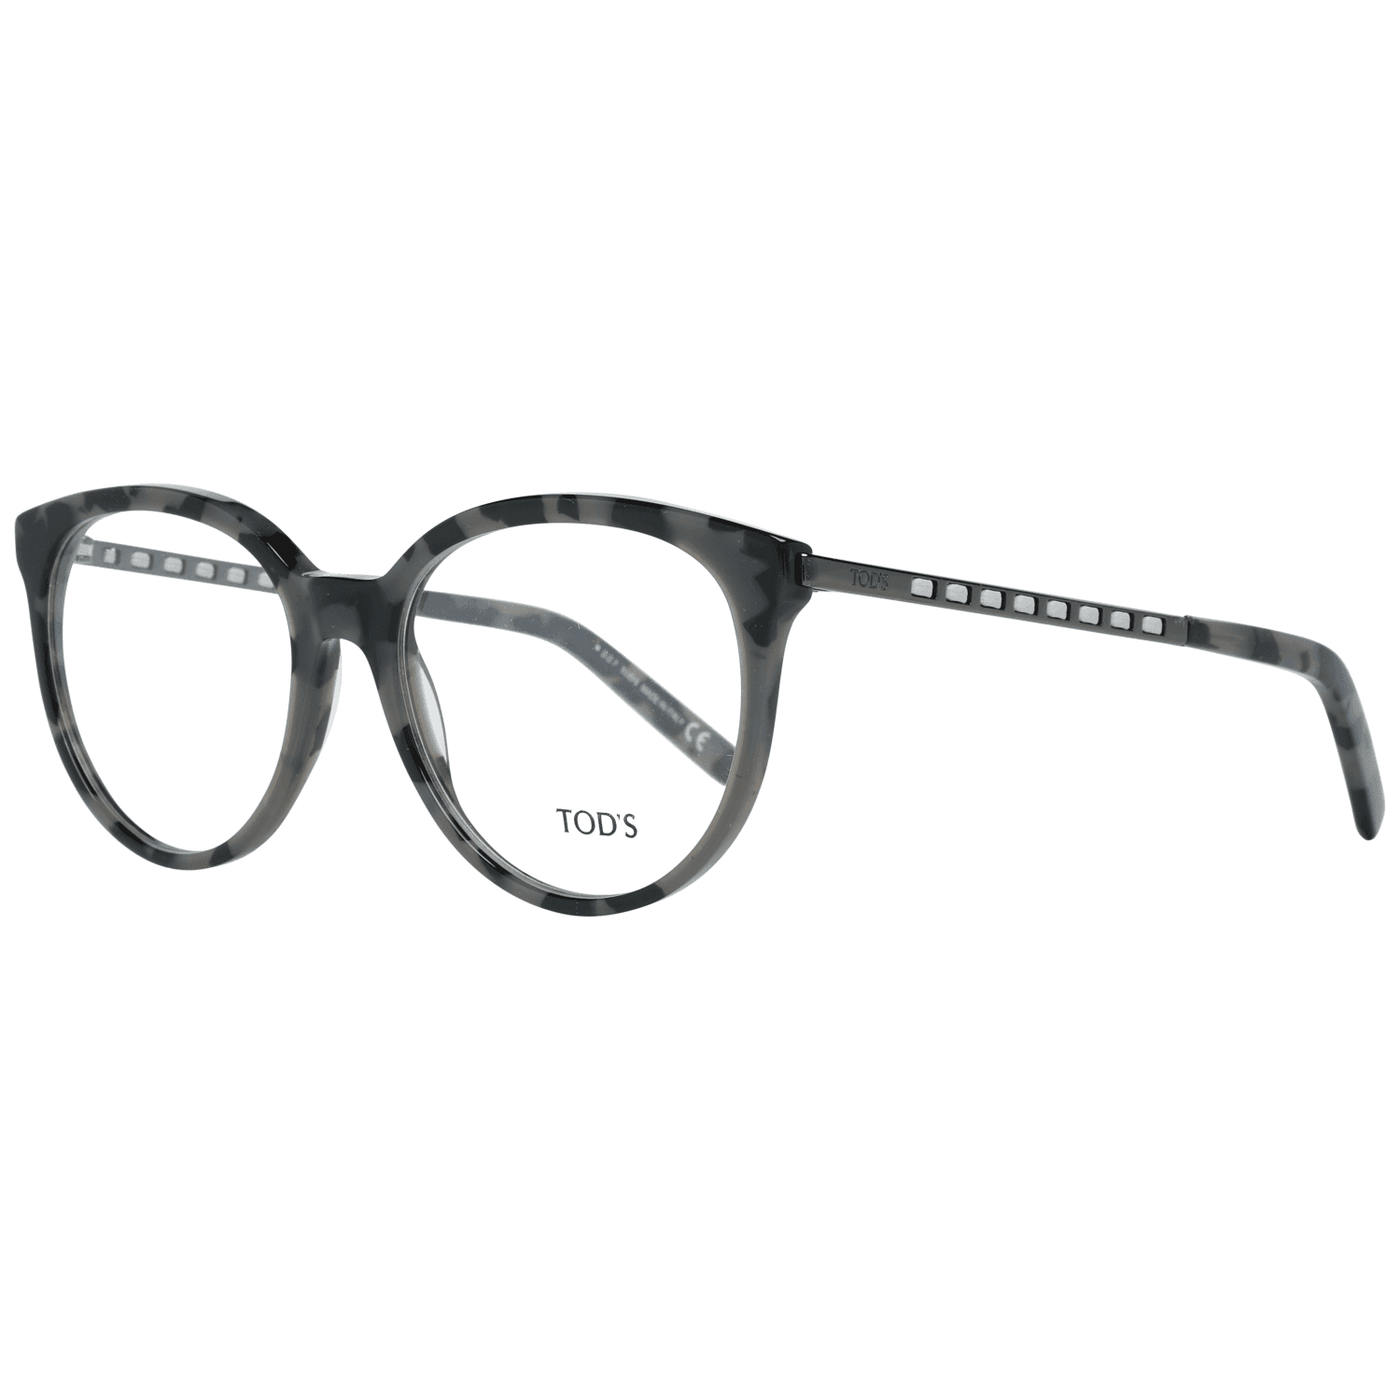 Tod's Grey Women Optical Frames #women, feed-agegroup-adult, feed-color-grey, feed-gender-female, Frames for Women - Frames, Grey, Tod's at SEYMAYKA